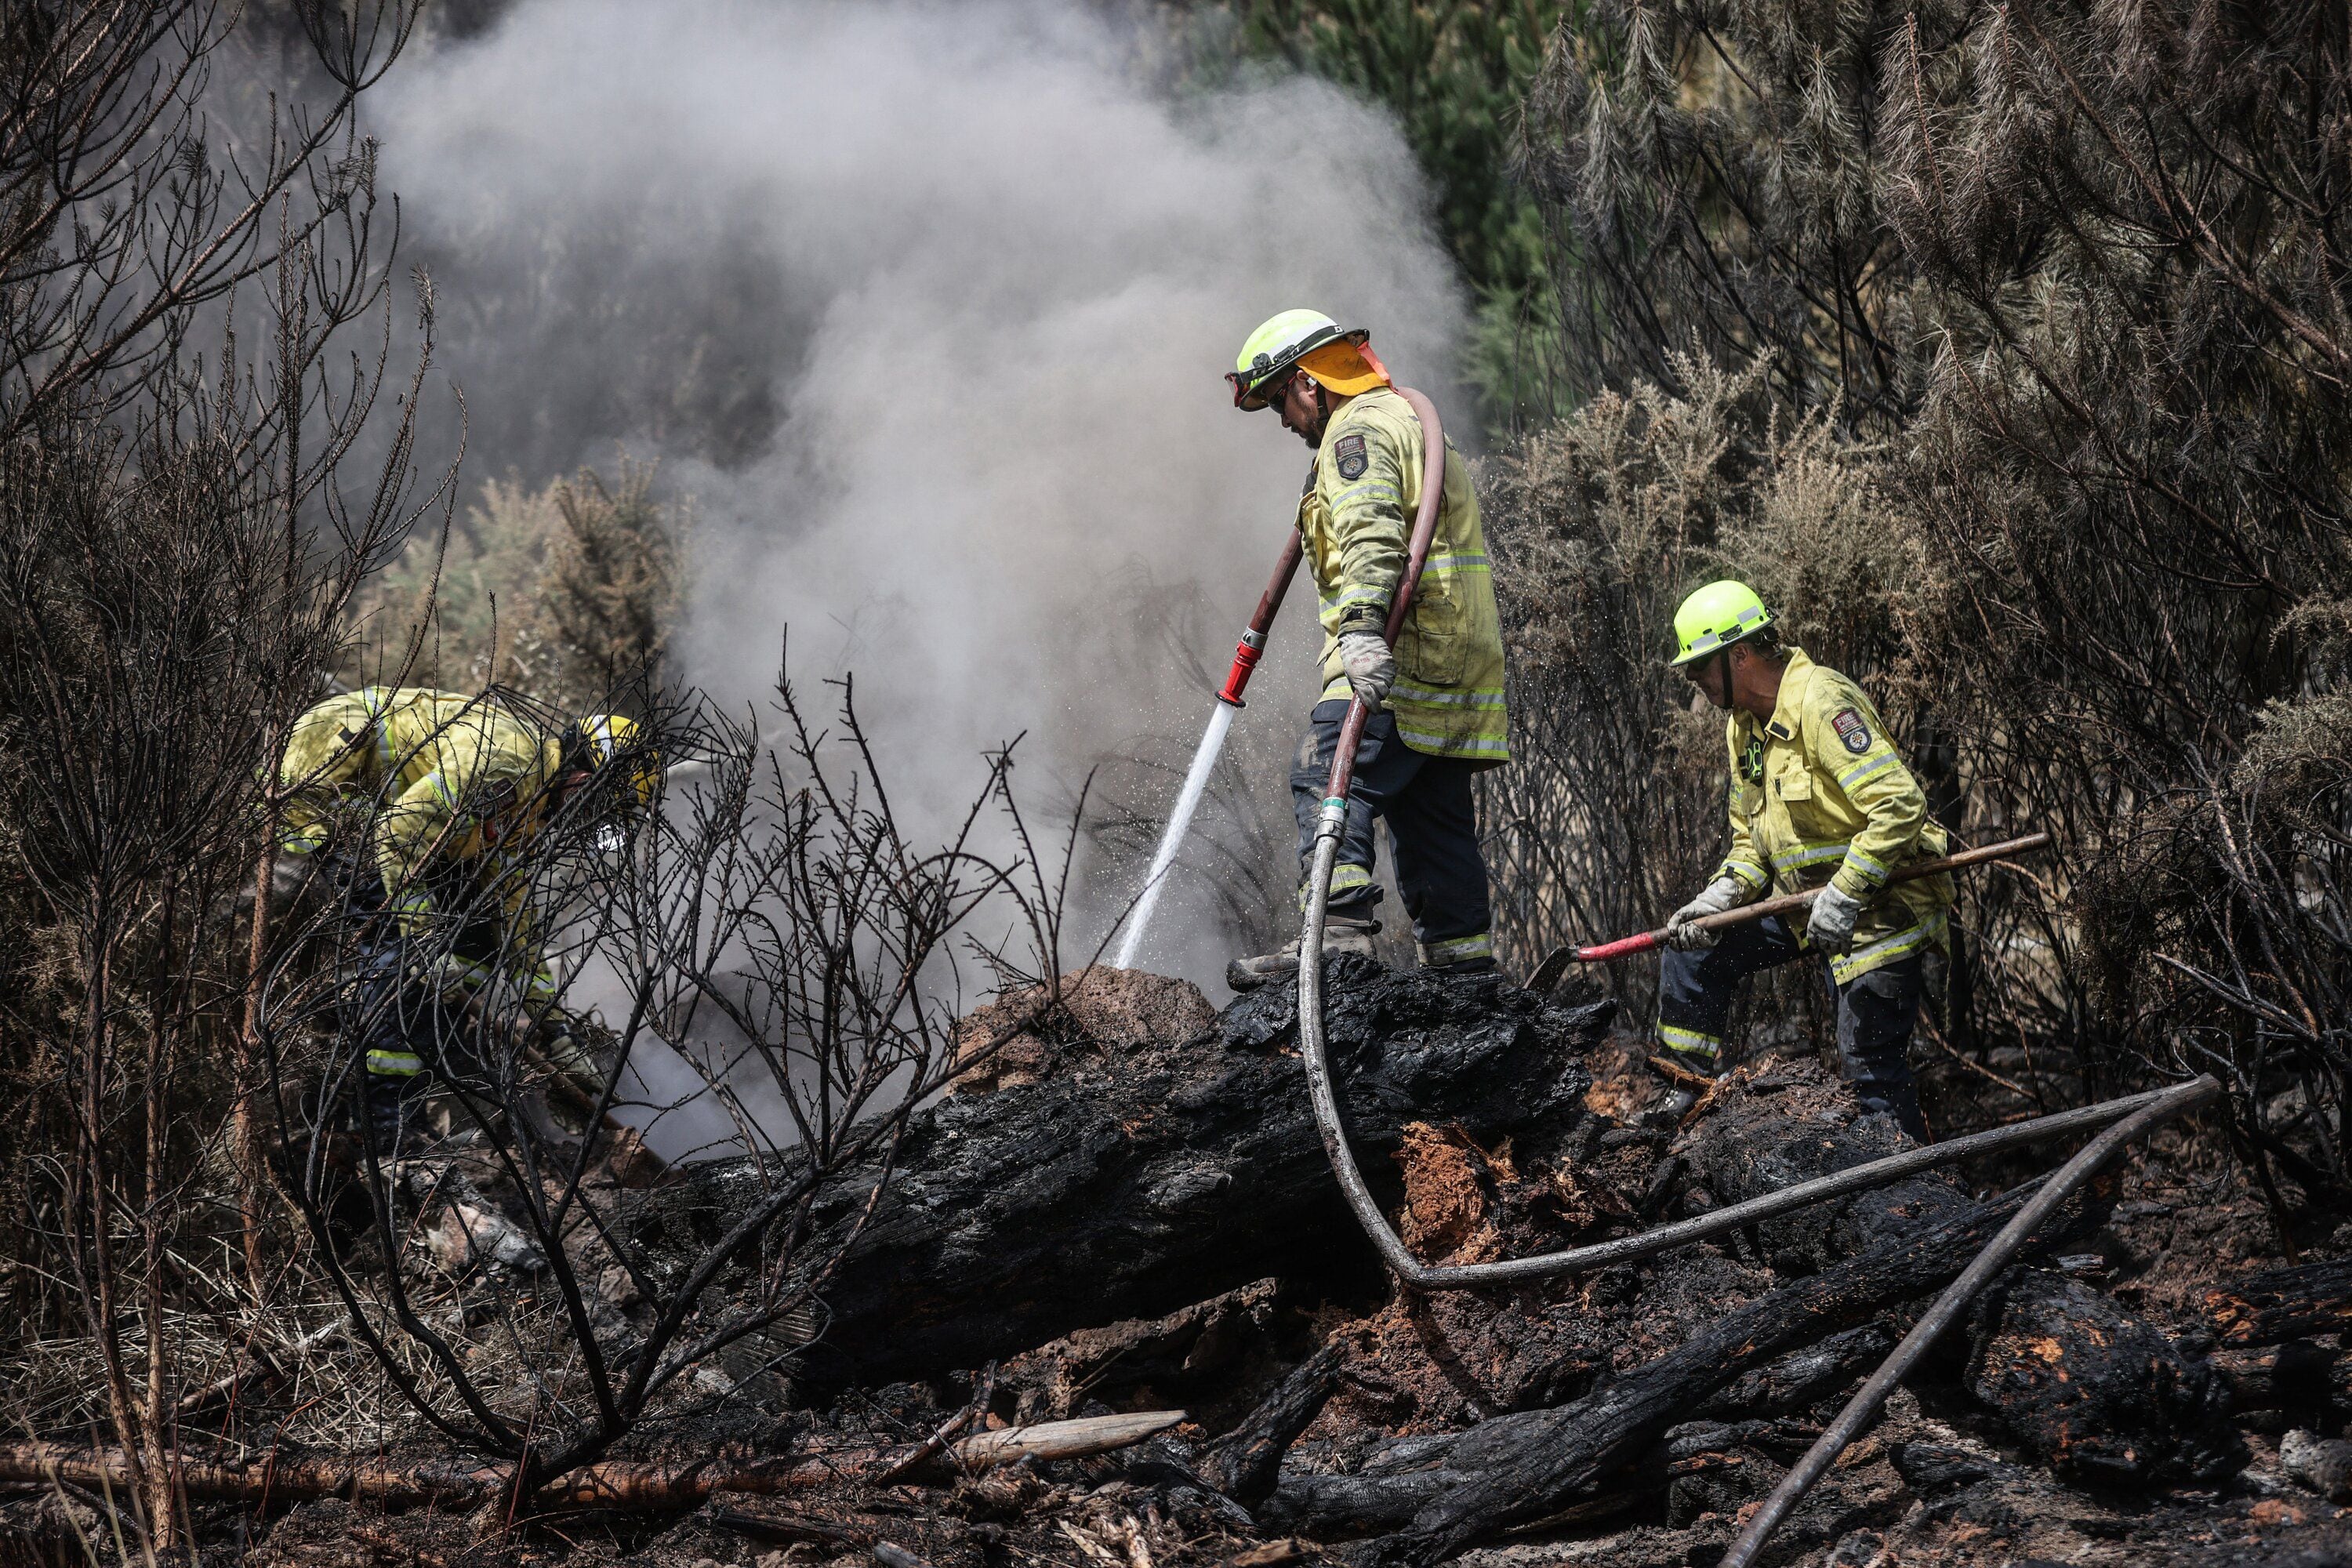 Update: Hyde Park Canyon blaze draws heavy response from fire crews, Accidents & Disaster